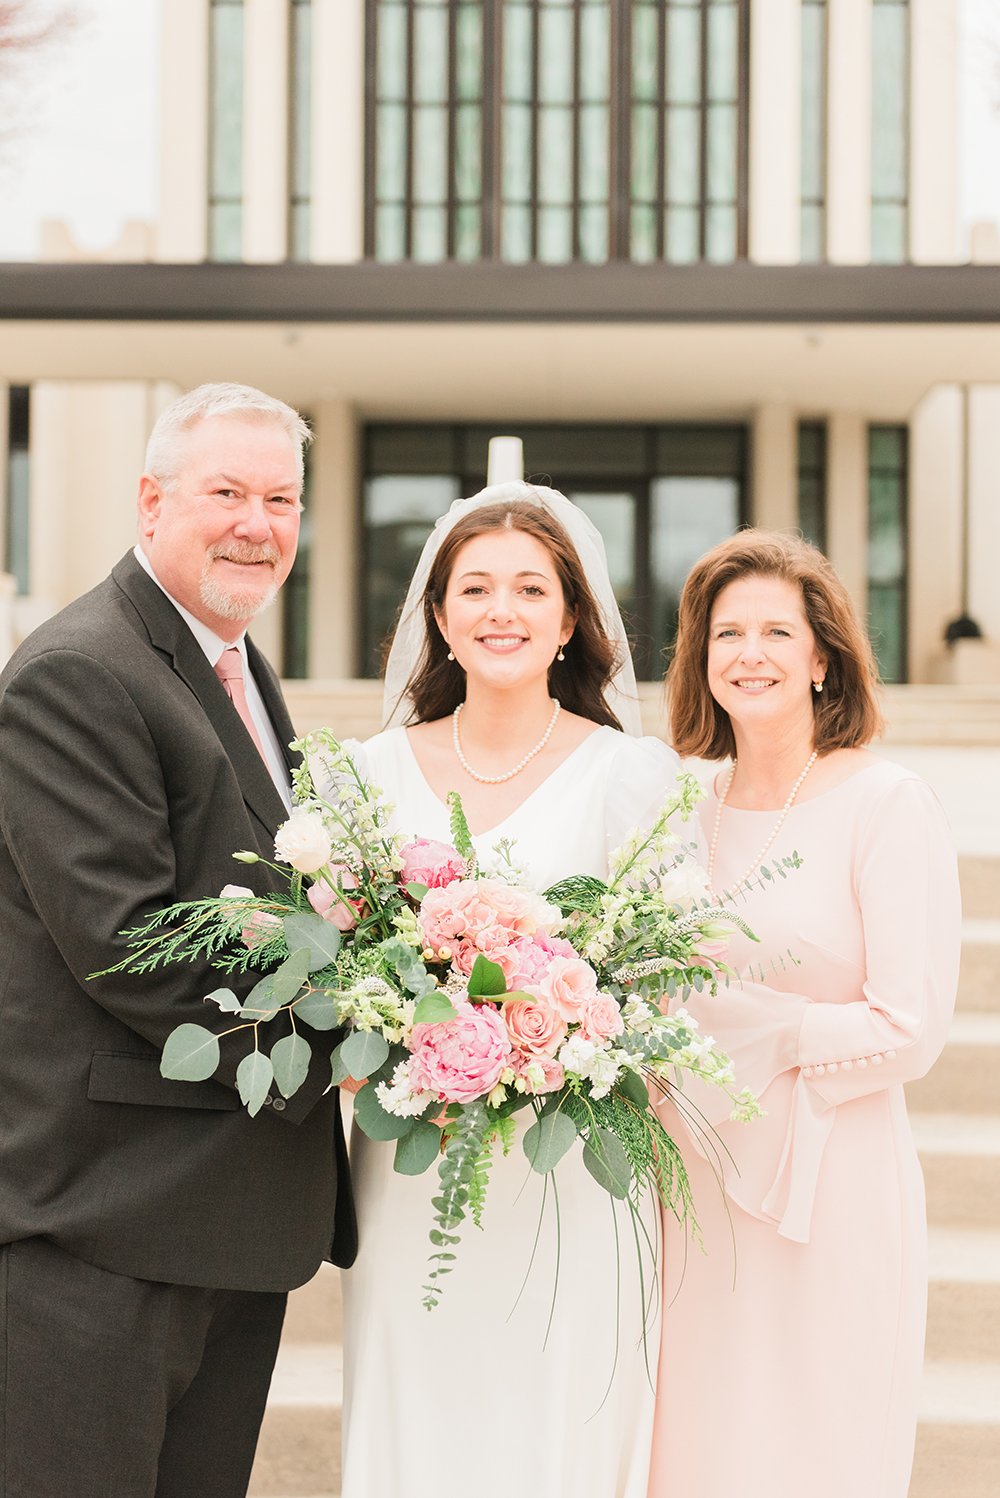  A bride stands with her mom and dad holding her wedding bouquet in front of the Atlanta, Georgia LDS temple. wedding photographer Atlanta photographer Sharpsburg Roswell #weddingphotographer #ldsweddings #atlantatemple #jacquieerickson #parentsofthe